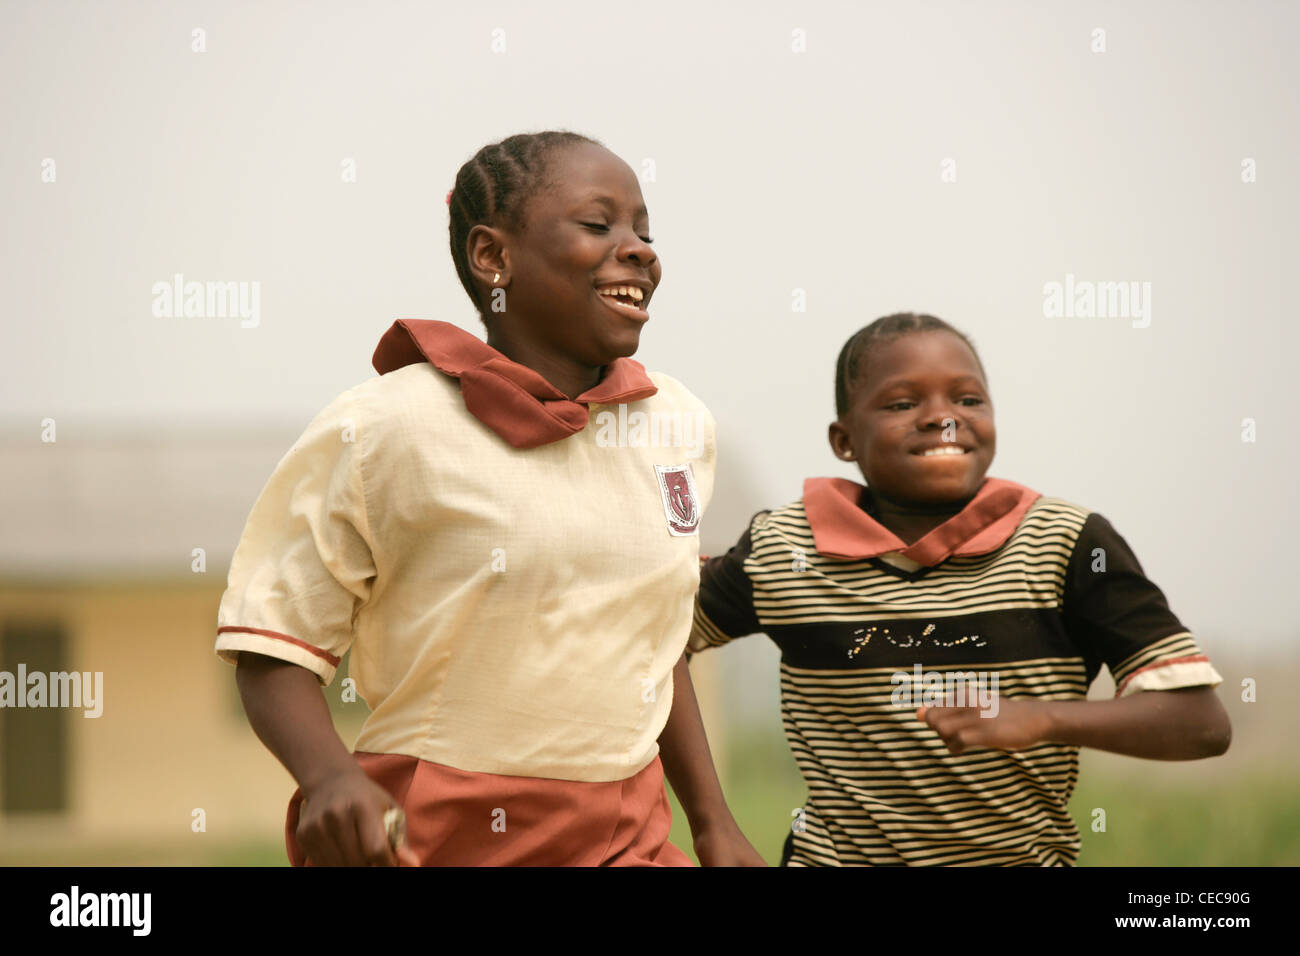 girls run a race during breaktime at a primary school in Lagos, Nigeria Stock Photo